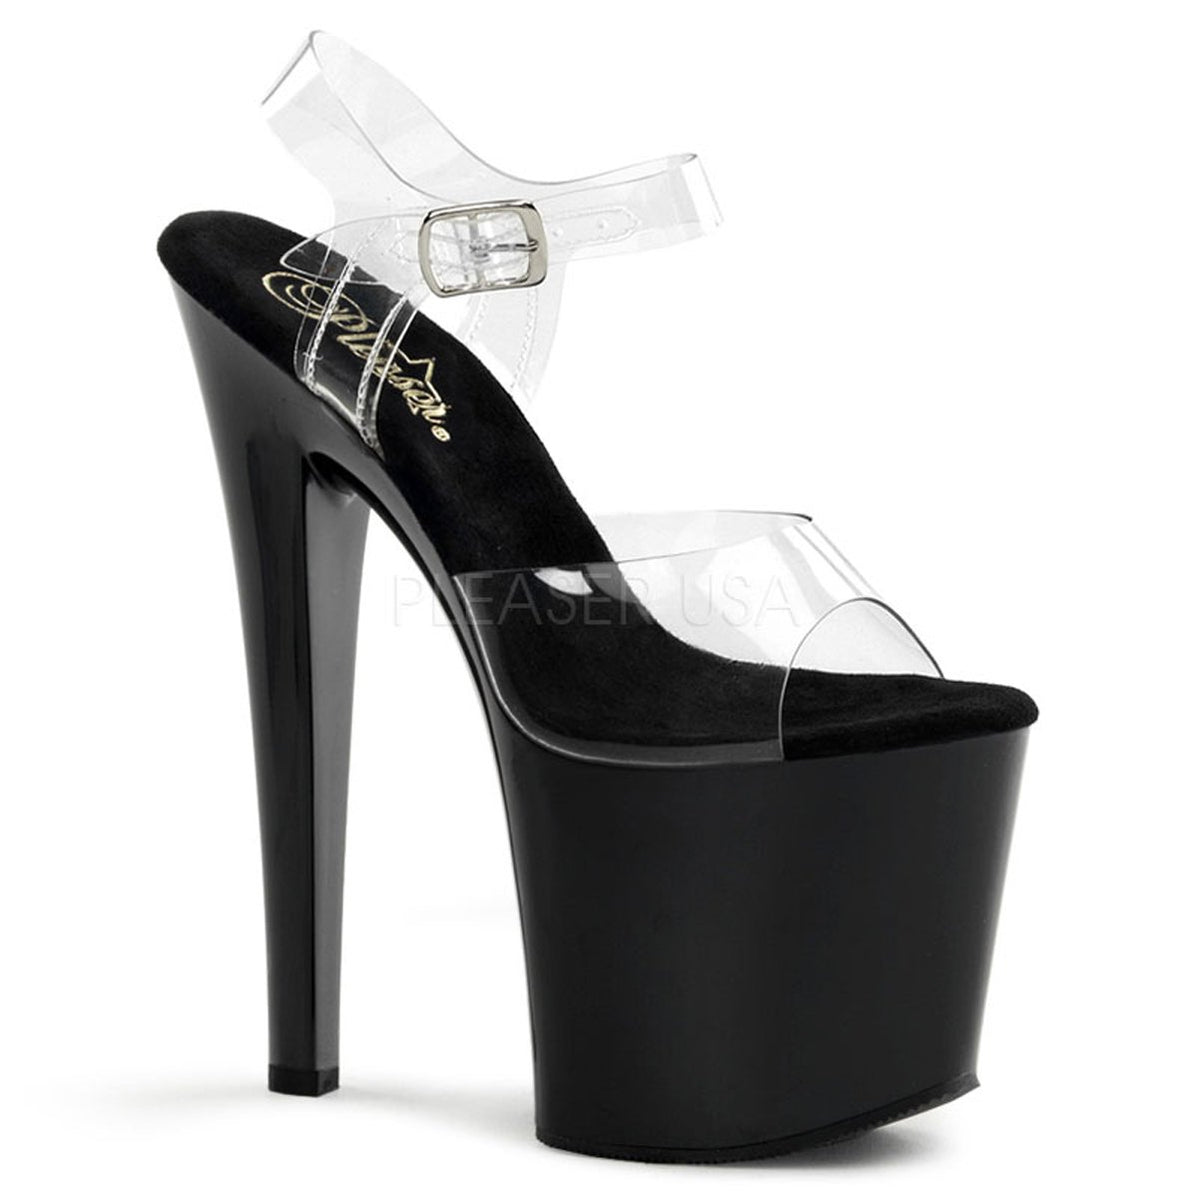 Pleaser Shoes | Pleaser Heels | Sinful Shoes — Page 4 — SinfulShoes.com